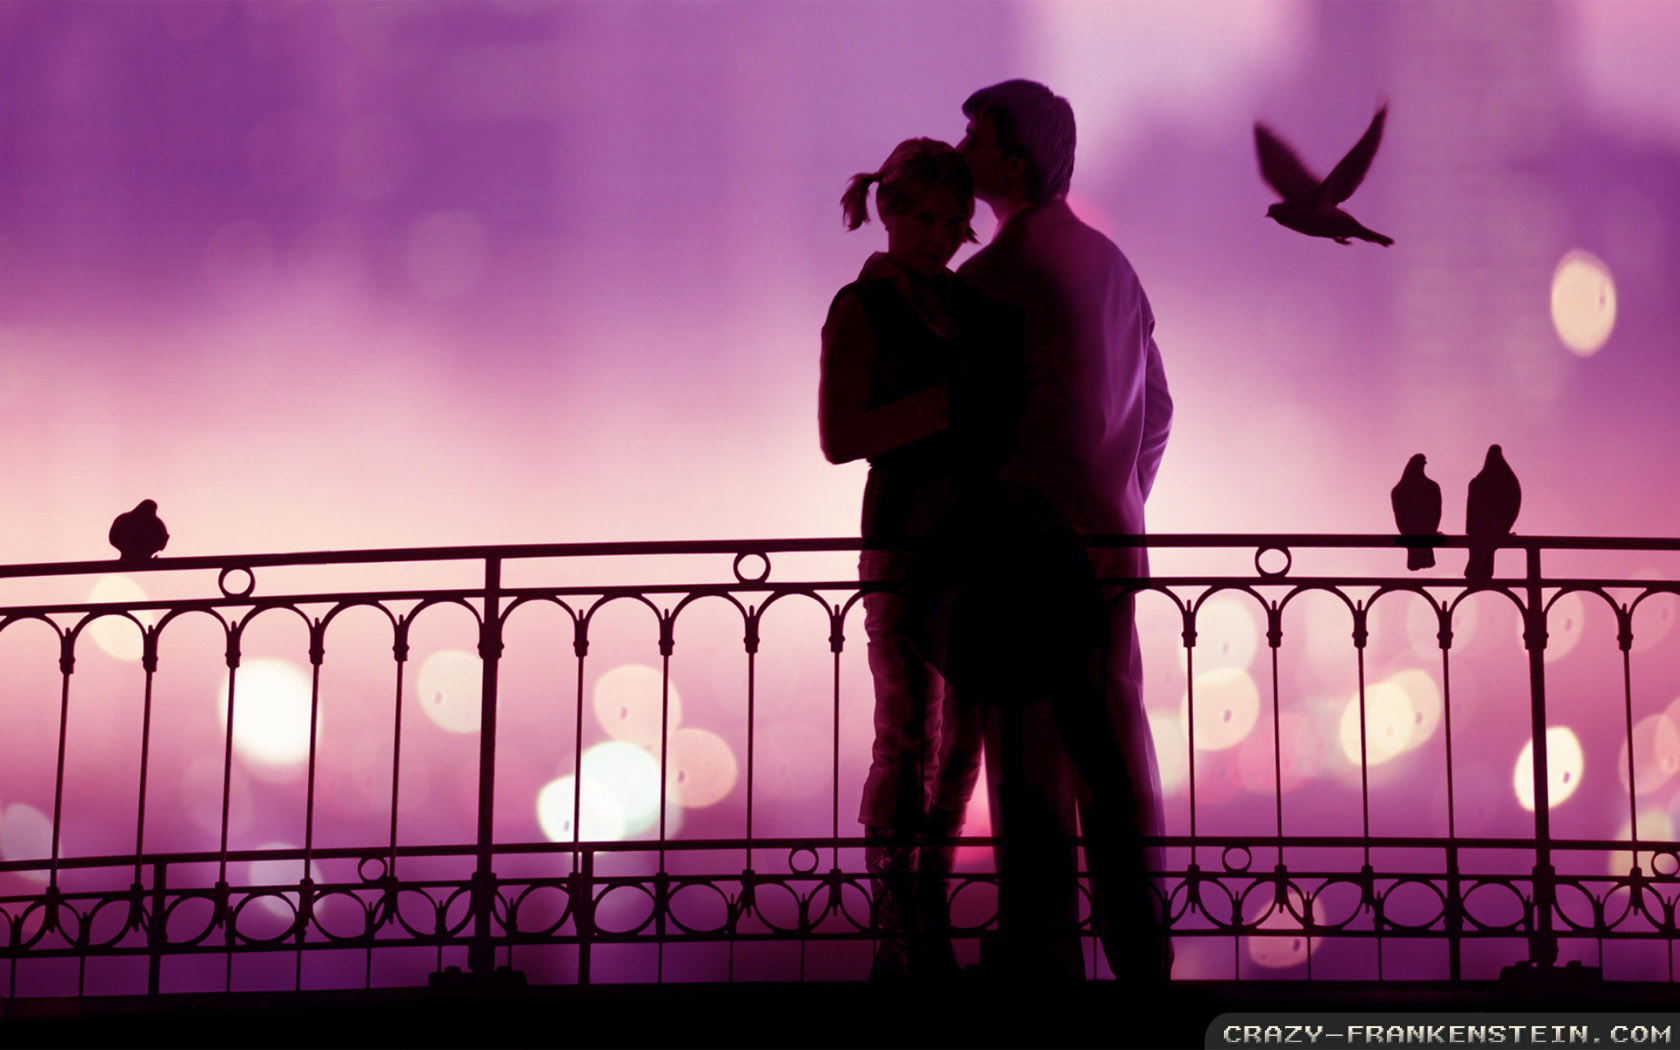 Nice Images Collection: Love At First Sight Desktop Wallpapers